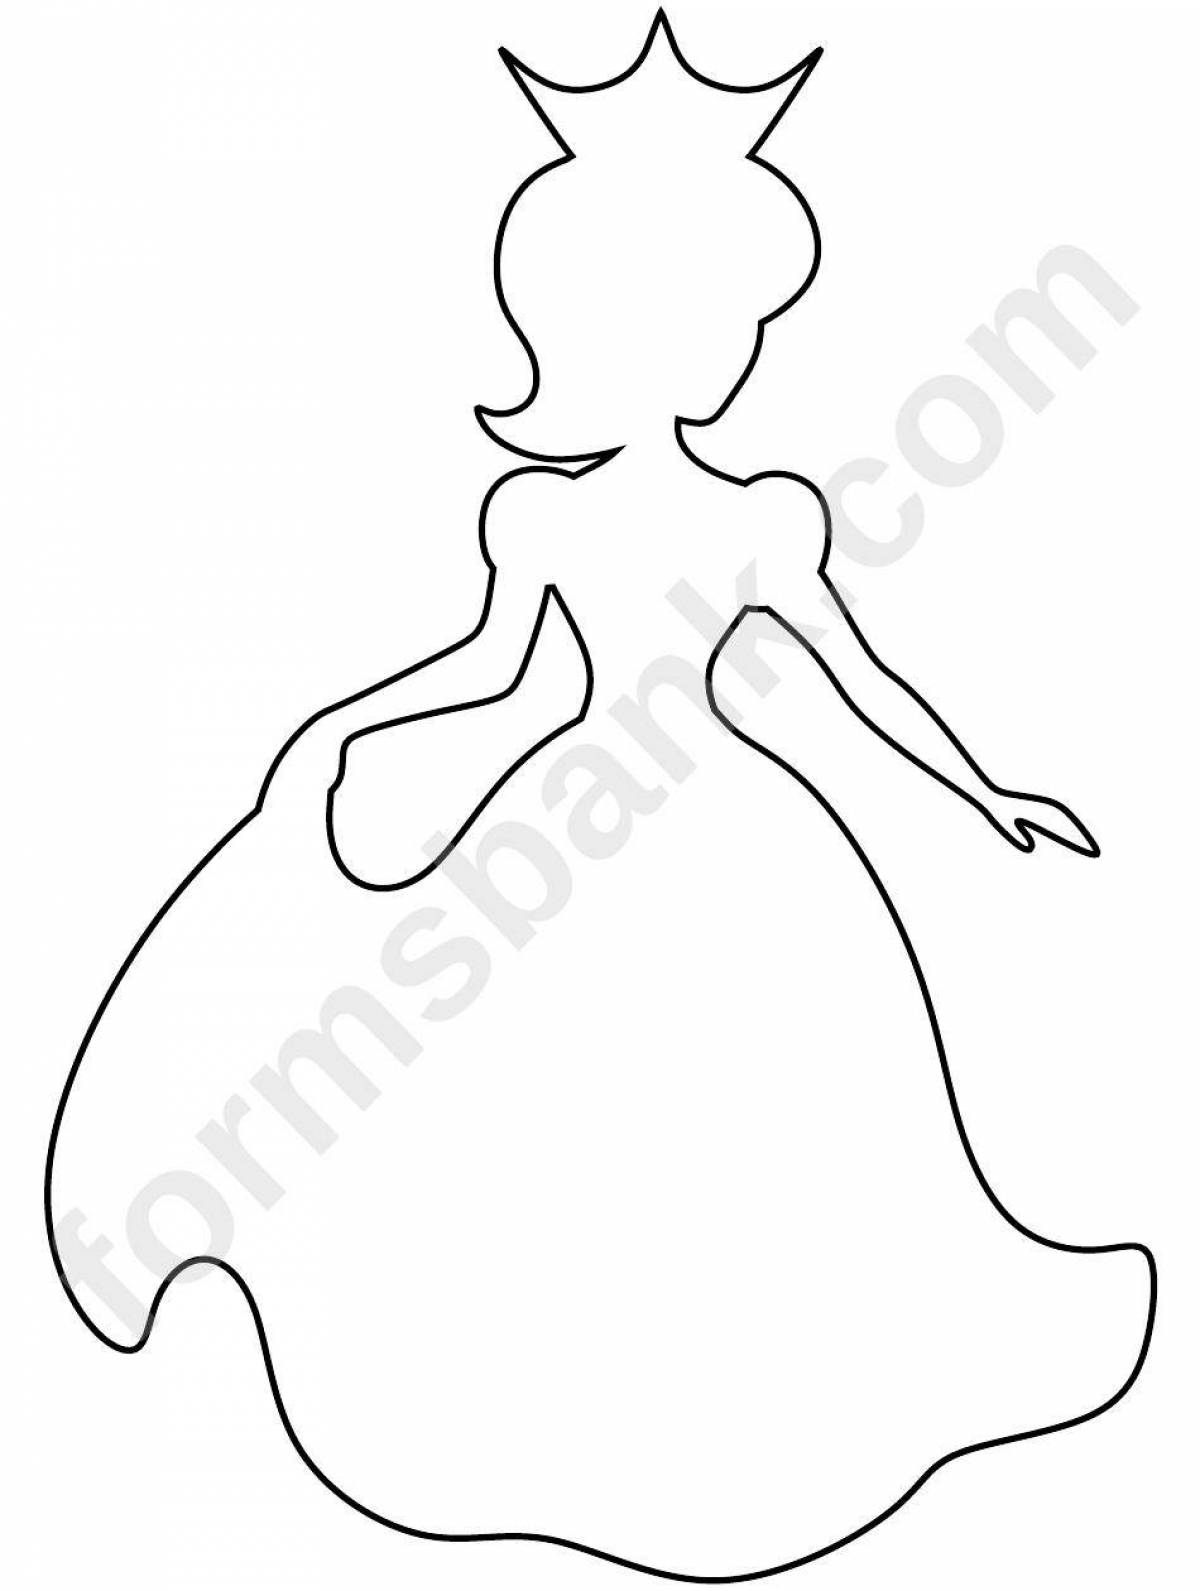 Fun coloring silhouette of a girl in a dress